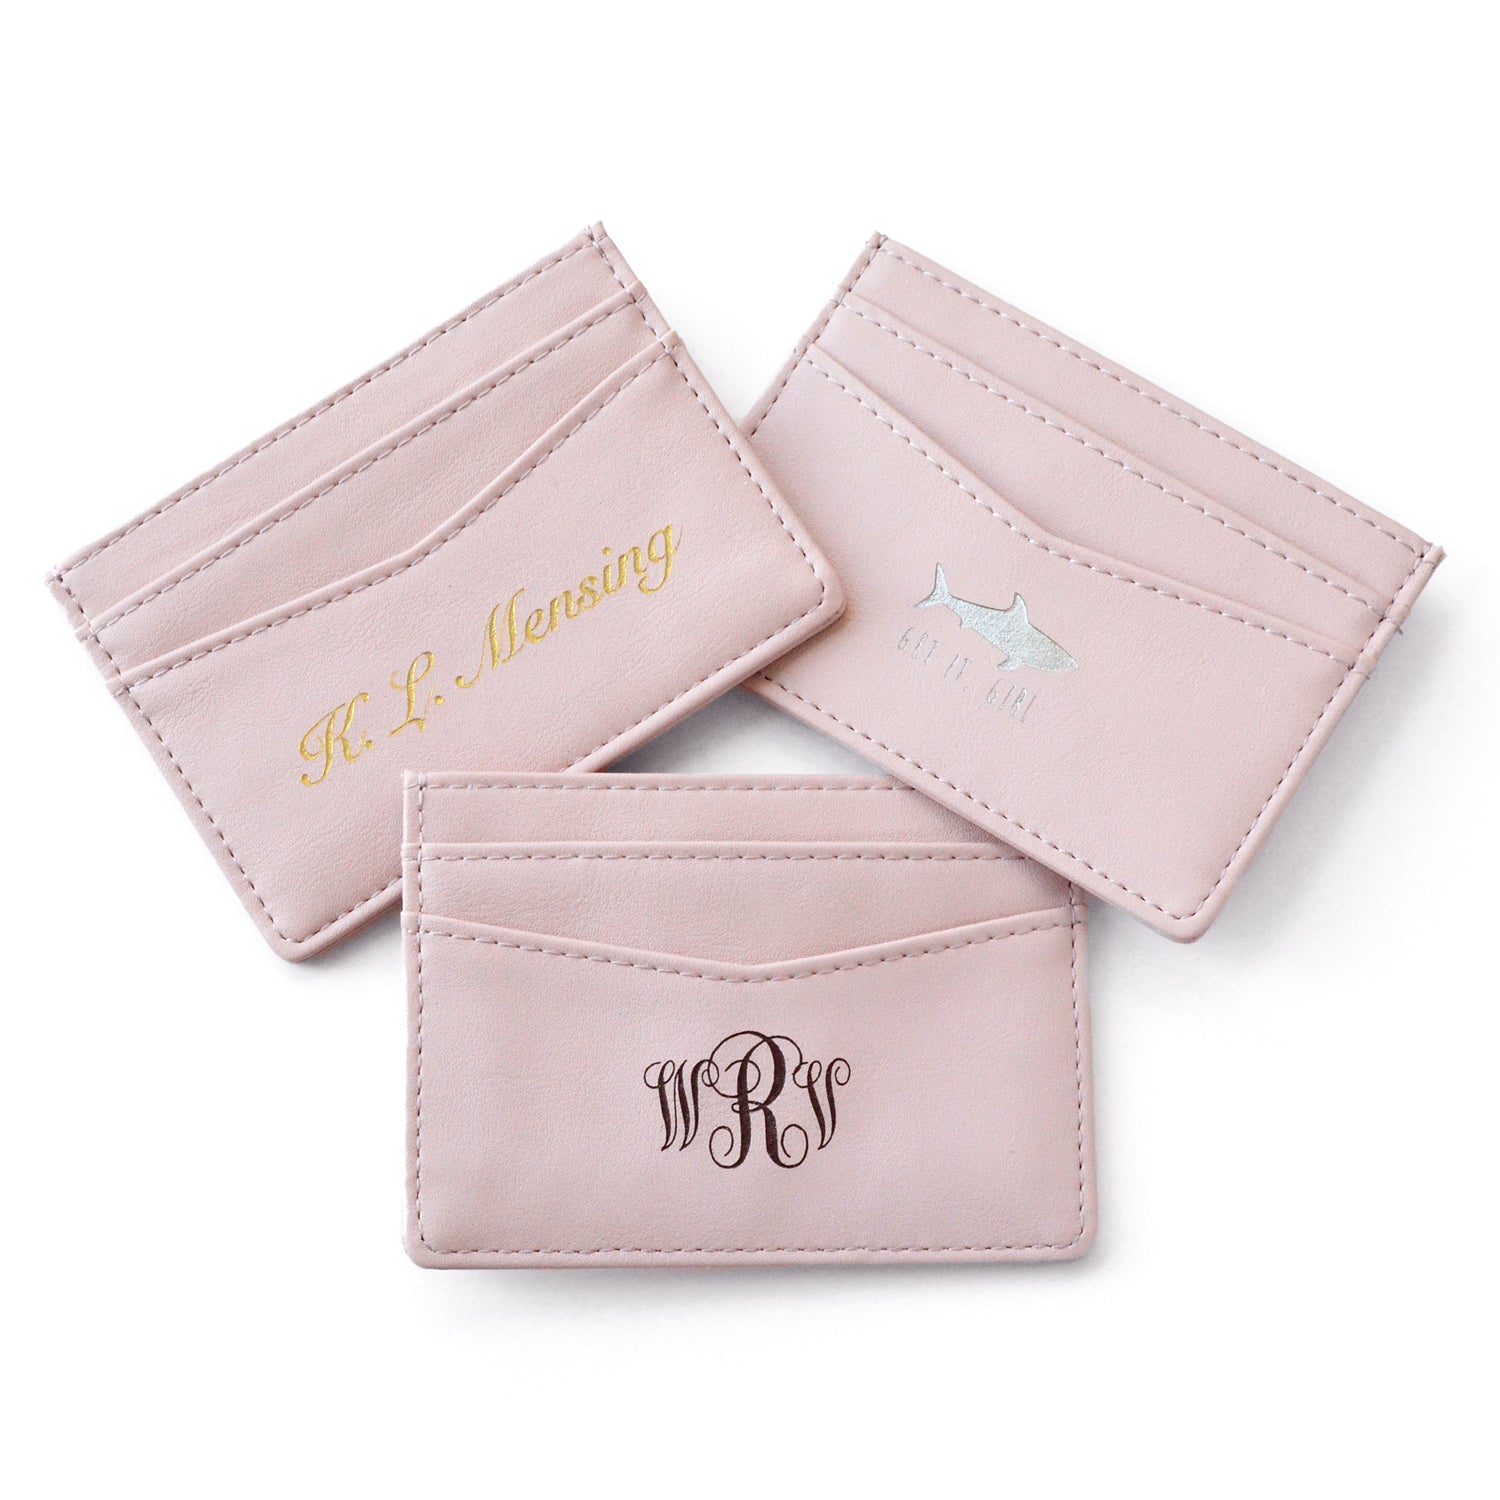 Personalized PU Leather Cardholder with Monogram or Signature